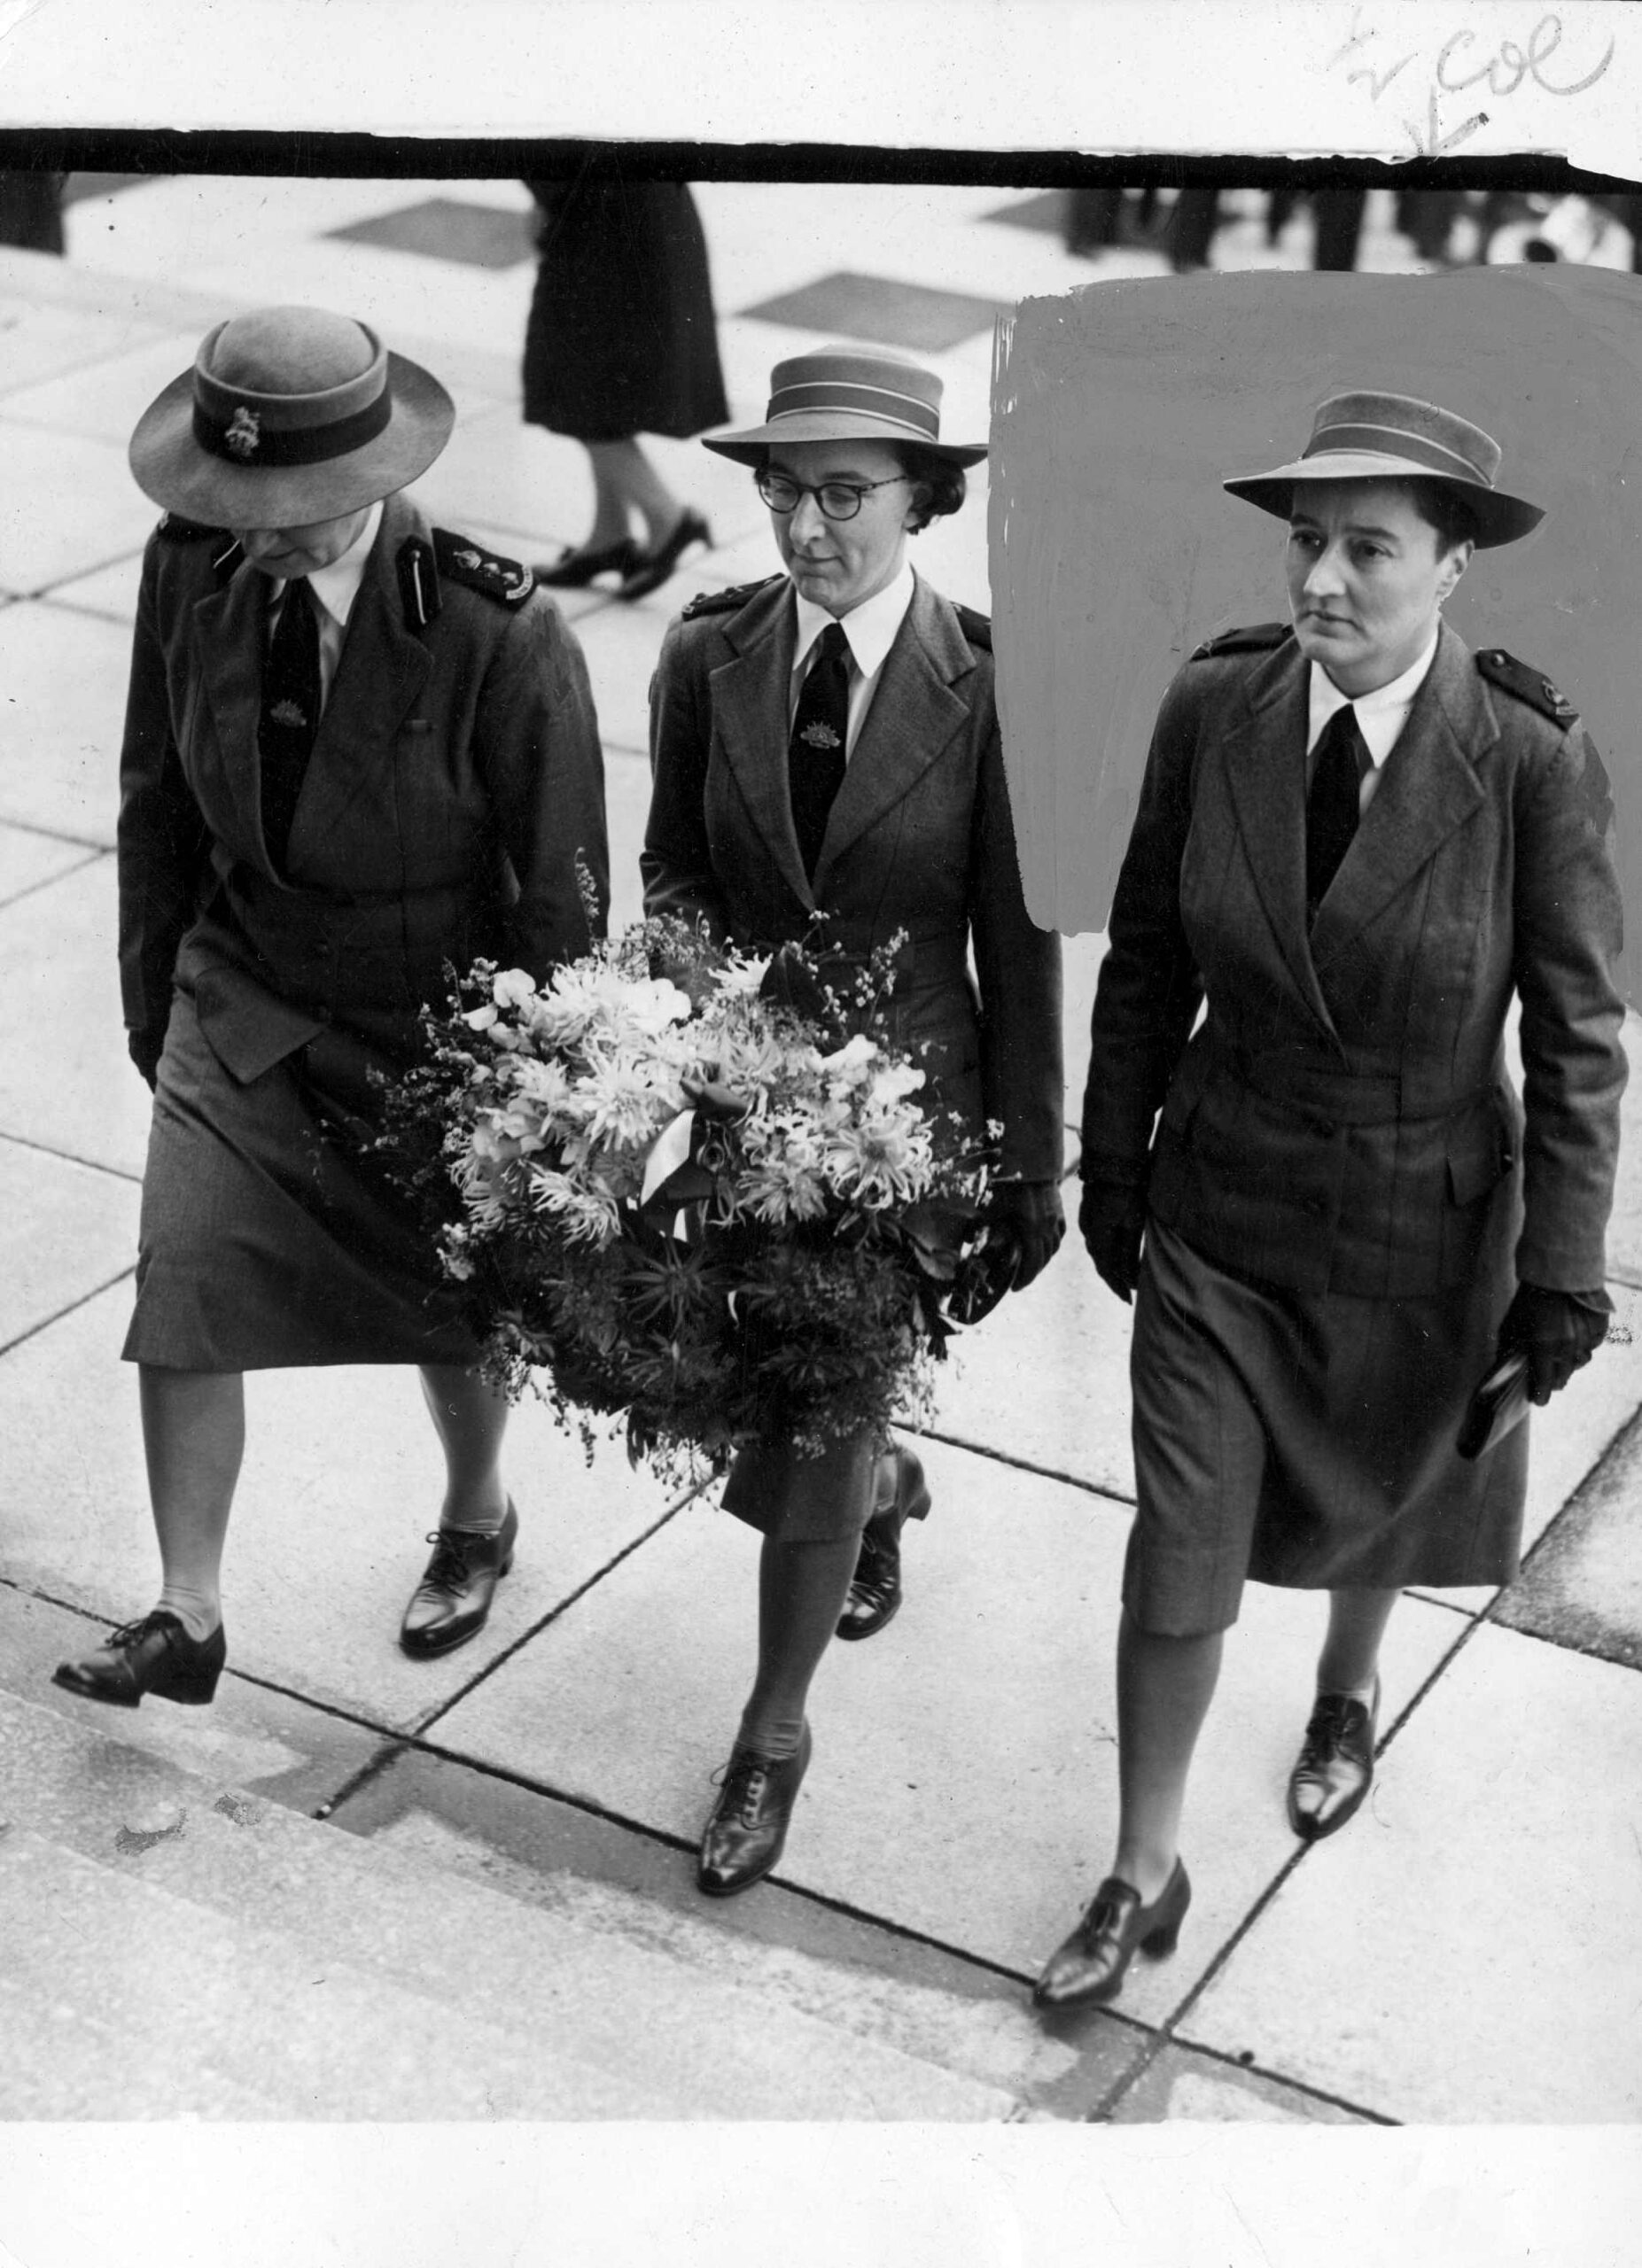 Three nurses in uniform walk in line with each other, approaching a set of stairs, with the middle nurse holding a wreath in her hands.